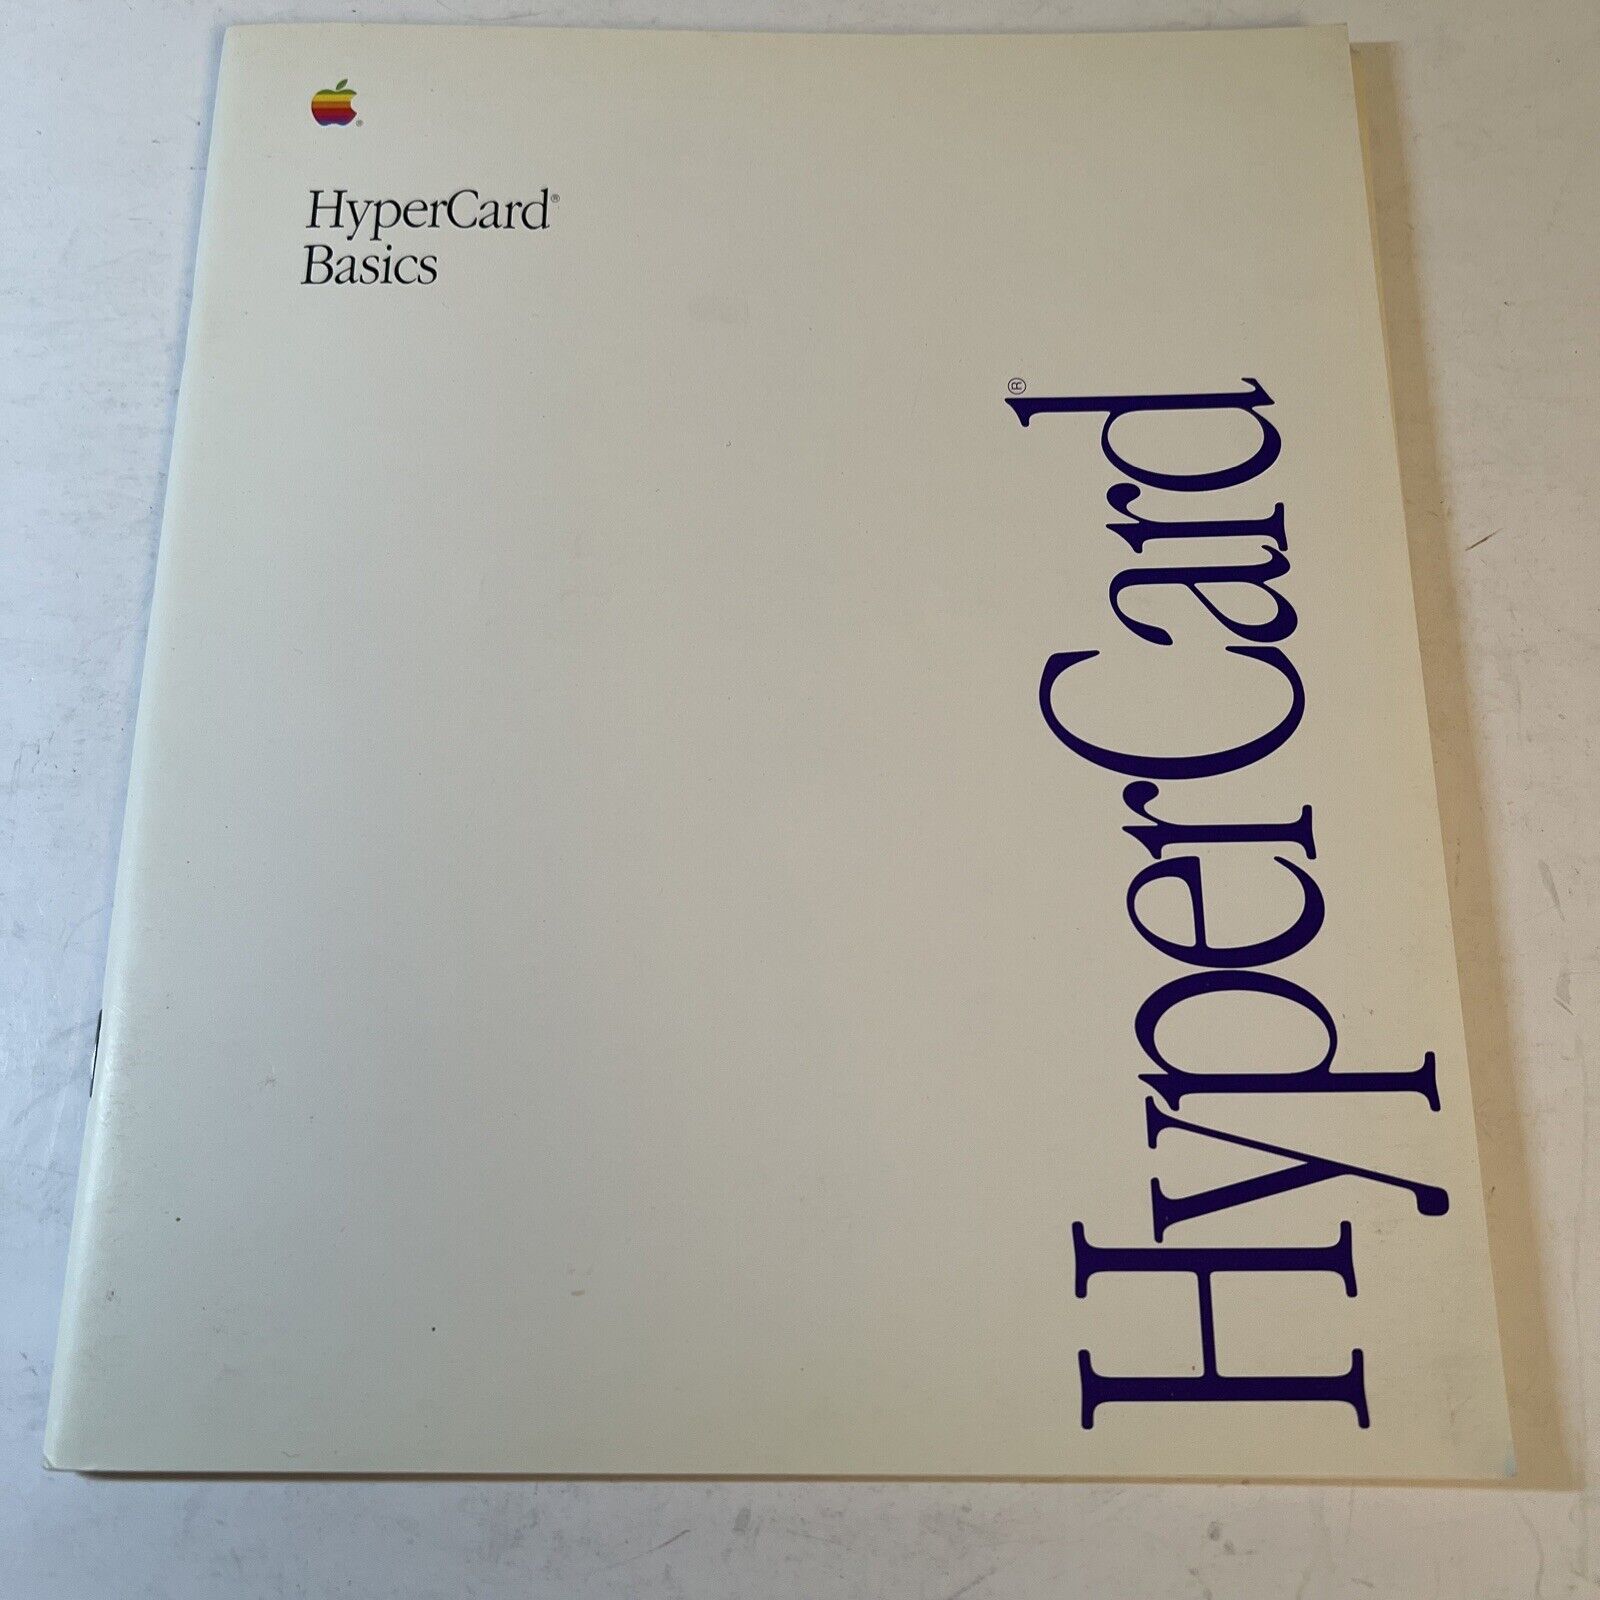 Vintage 1990 Apple Macintosh HyperCard Basics Reference Guide 030-3498-A